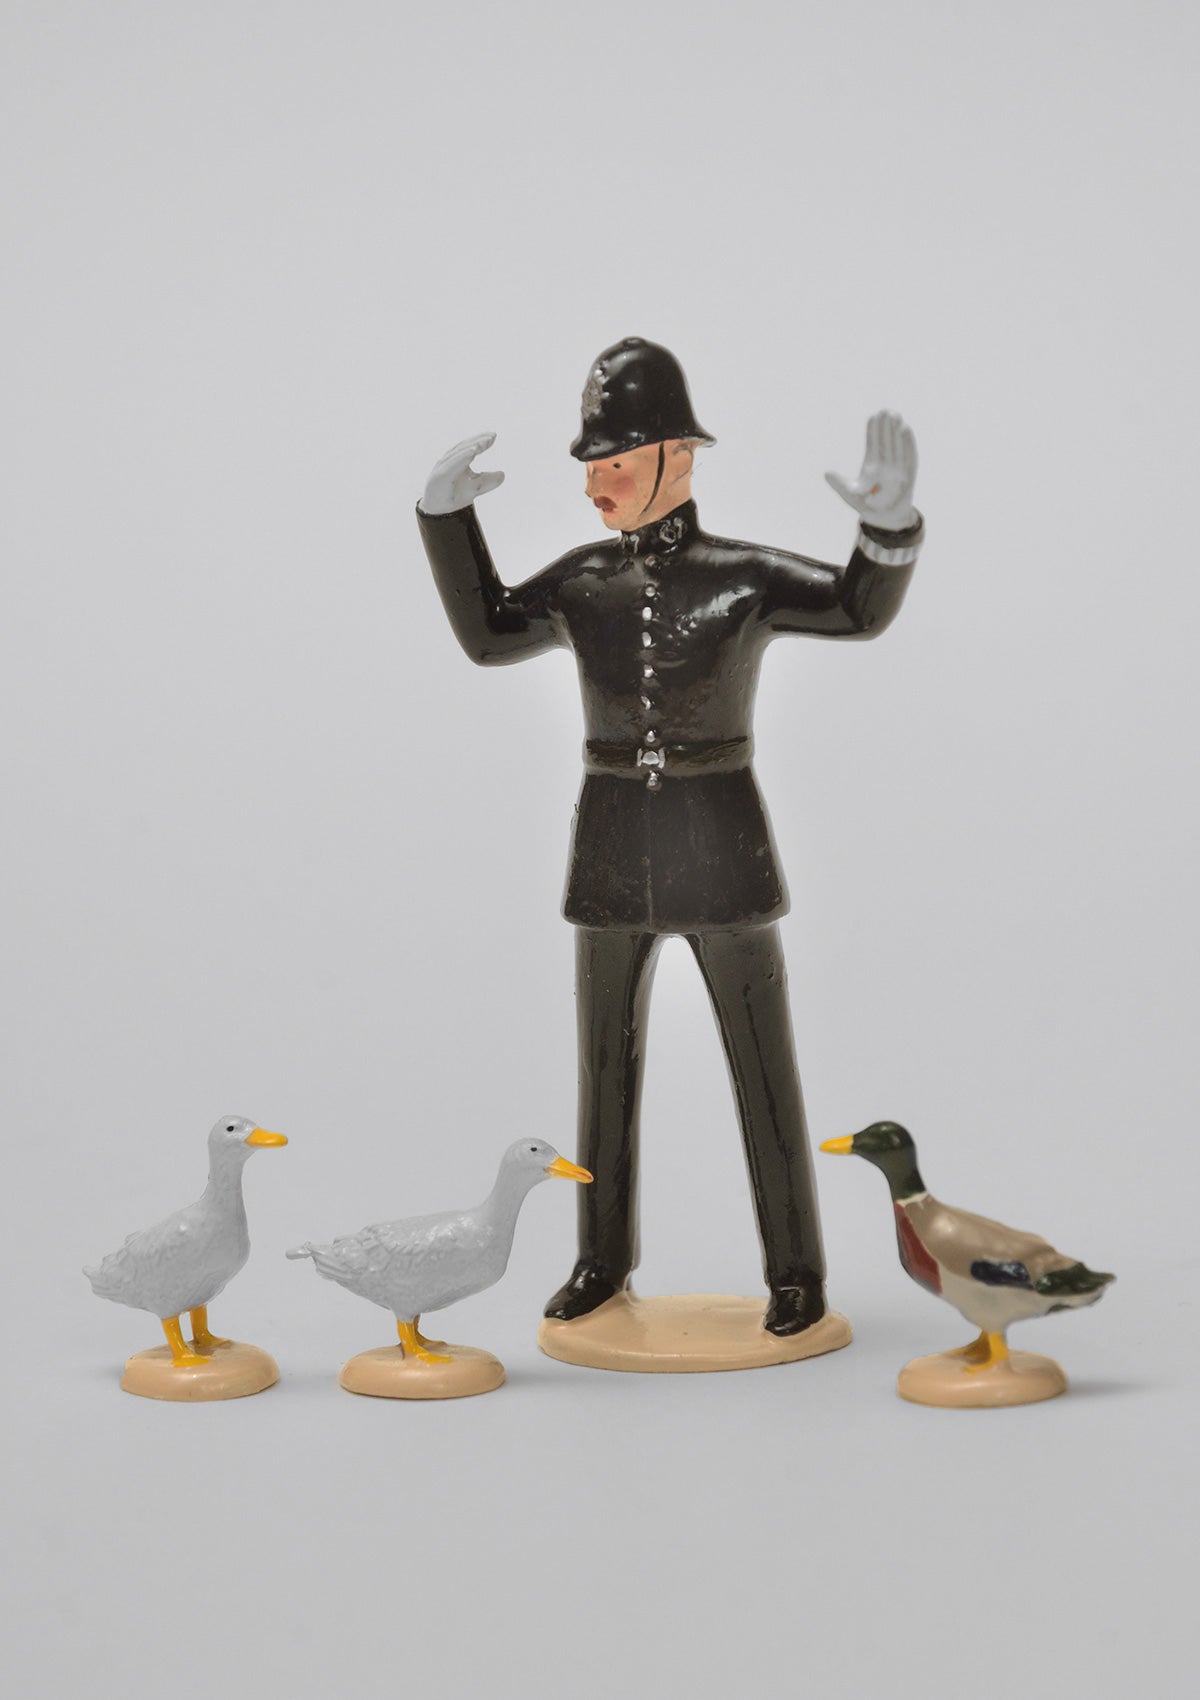 Set 59 Ducks Crossing | Victorian Man and Animals | Town and Around | © Imperial Productions | Sculpt by David Cowe